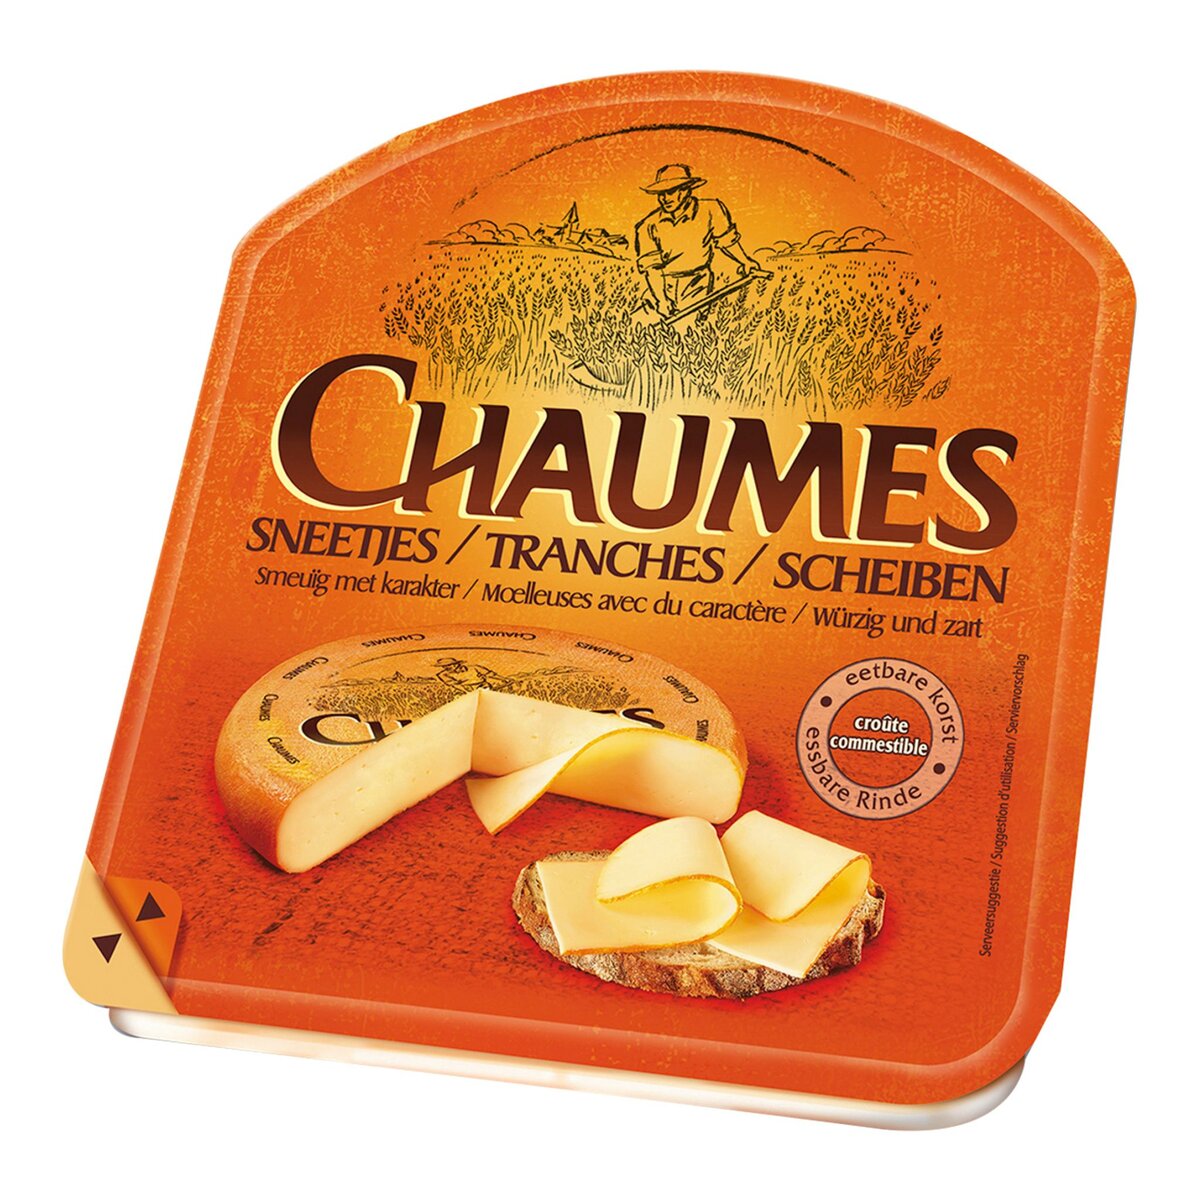 CHAUMES Chaumes Fromage en tranches 130g 130g